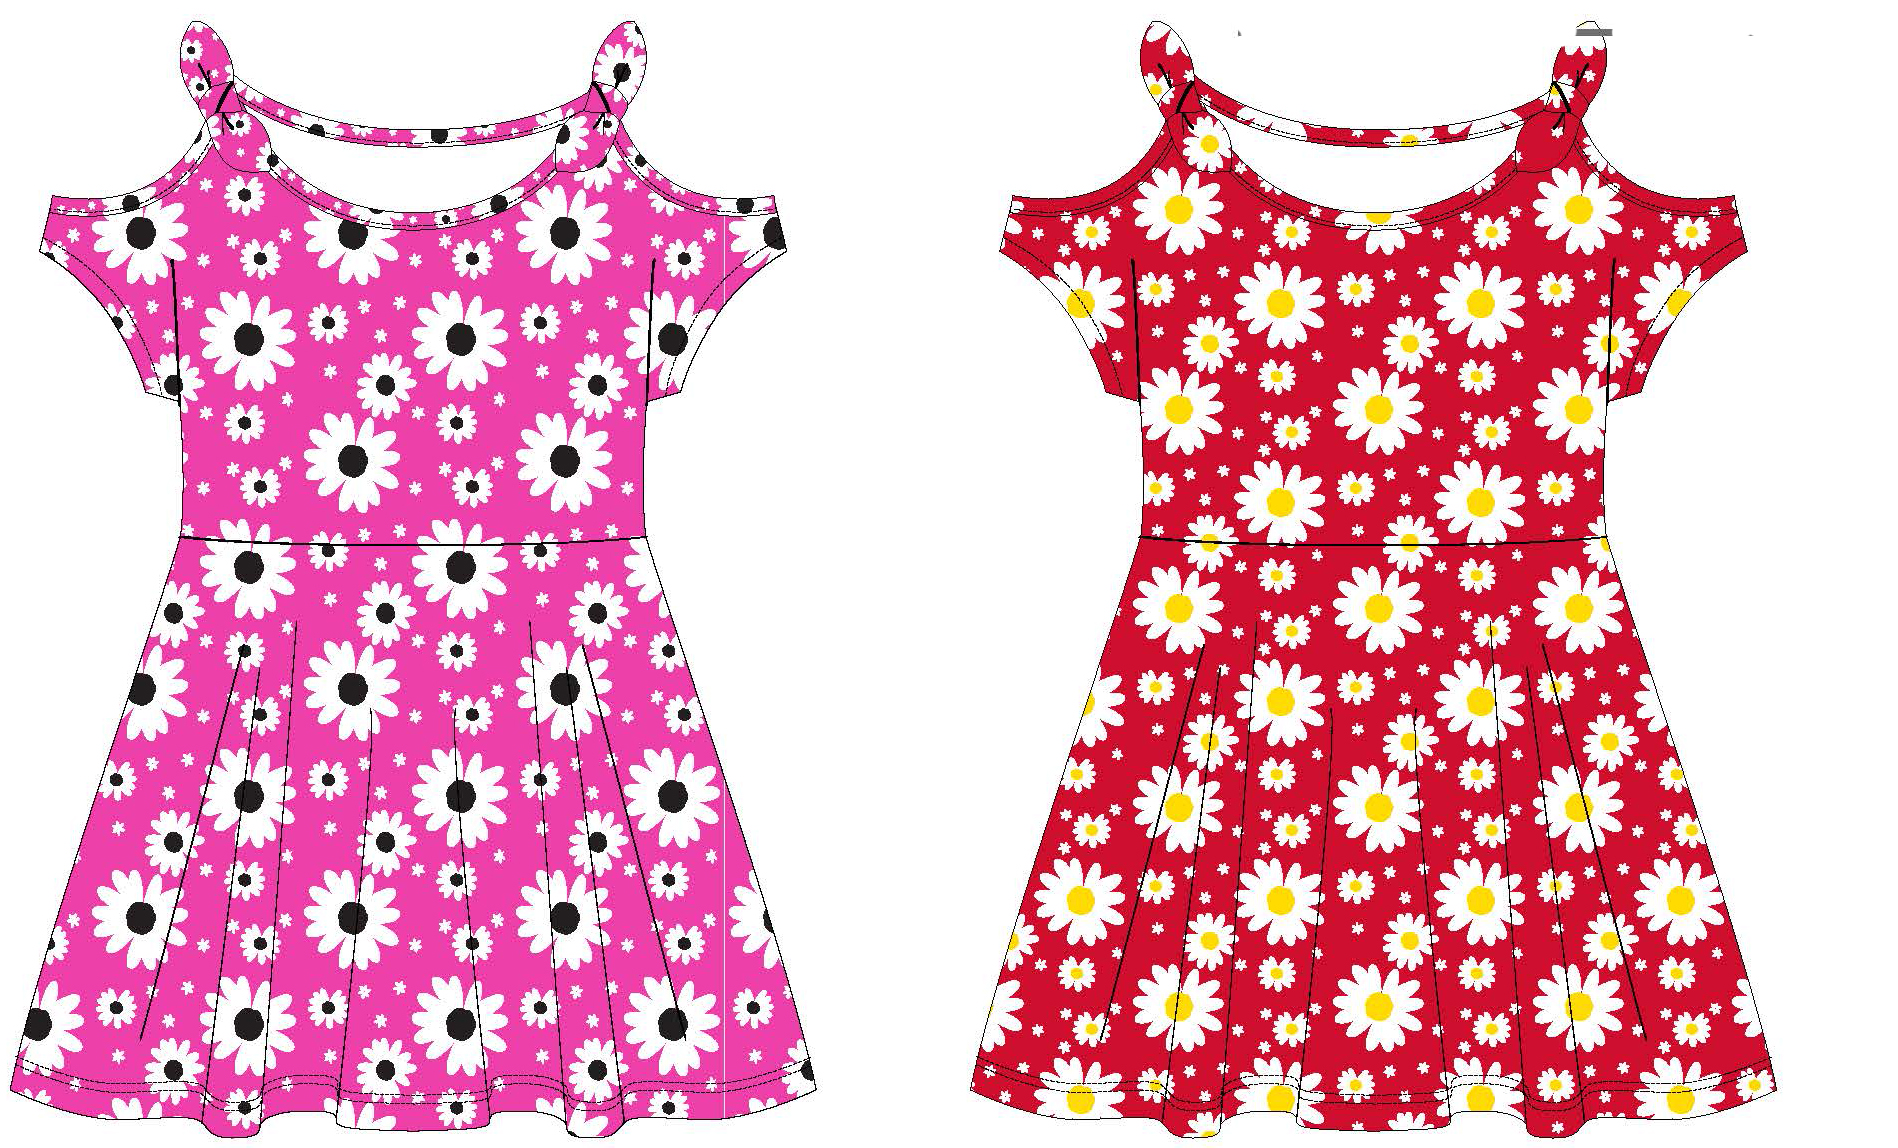 Baby Girl's Printed Knit DRESS w/ Daisy Pop Floral Print - Sizes 12M-24M